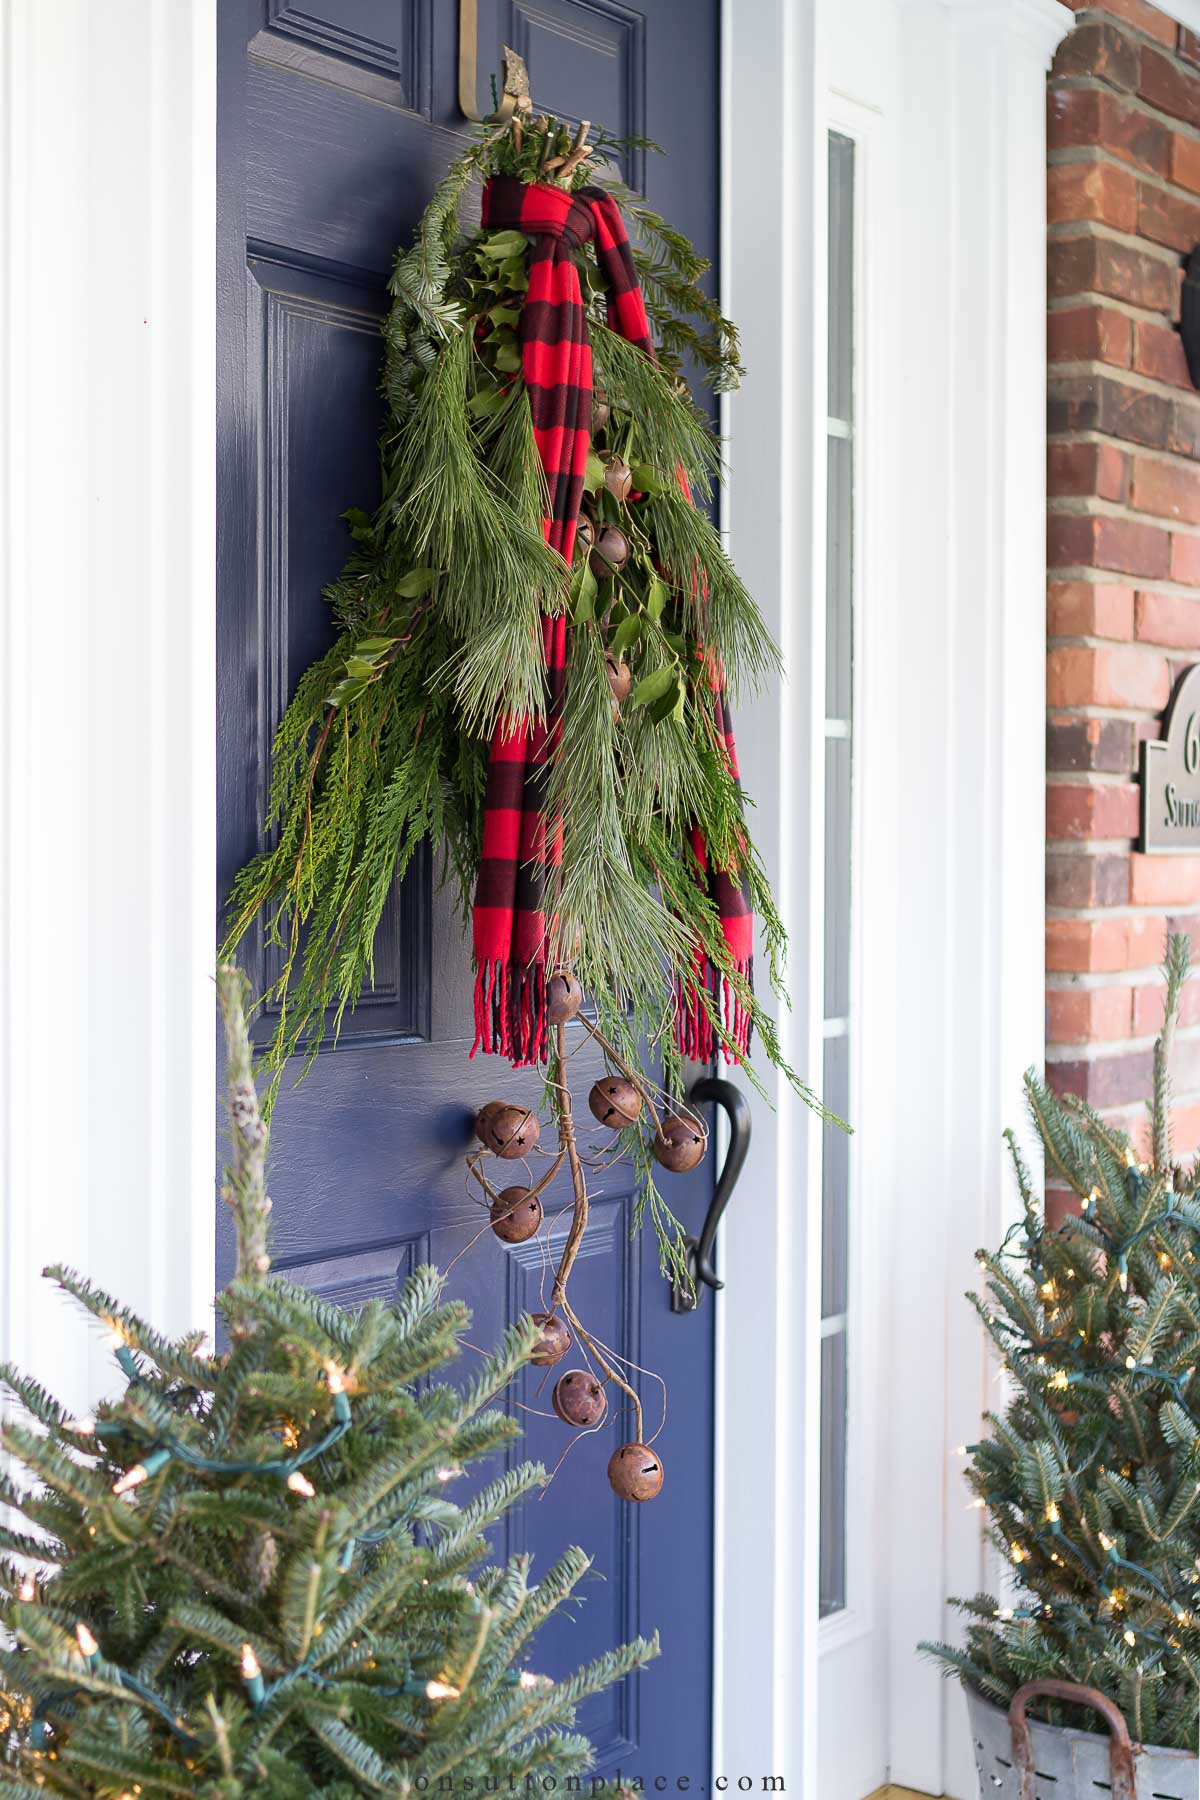 12 Cheap Christmas Decorating Ideas - The Frugal Housewife